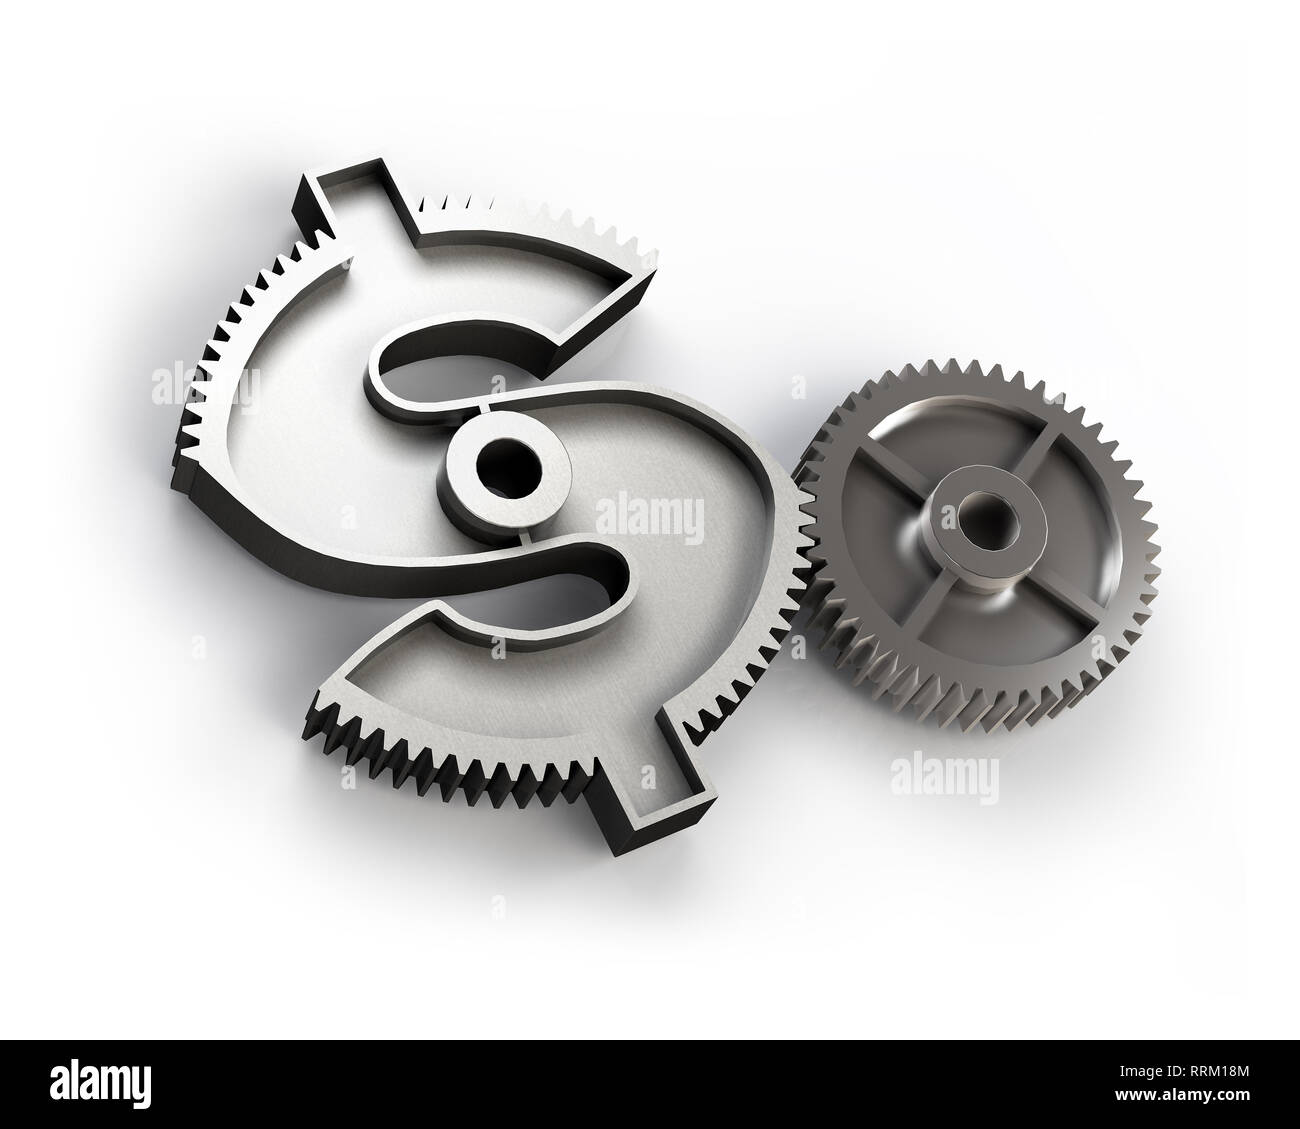 Mechanical gear 3d model on a white background Stock Photo - Alamy